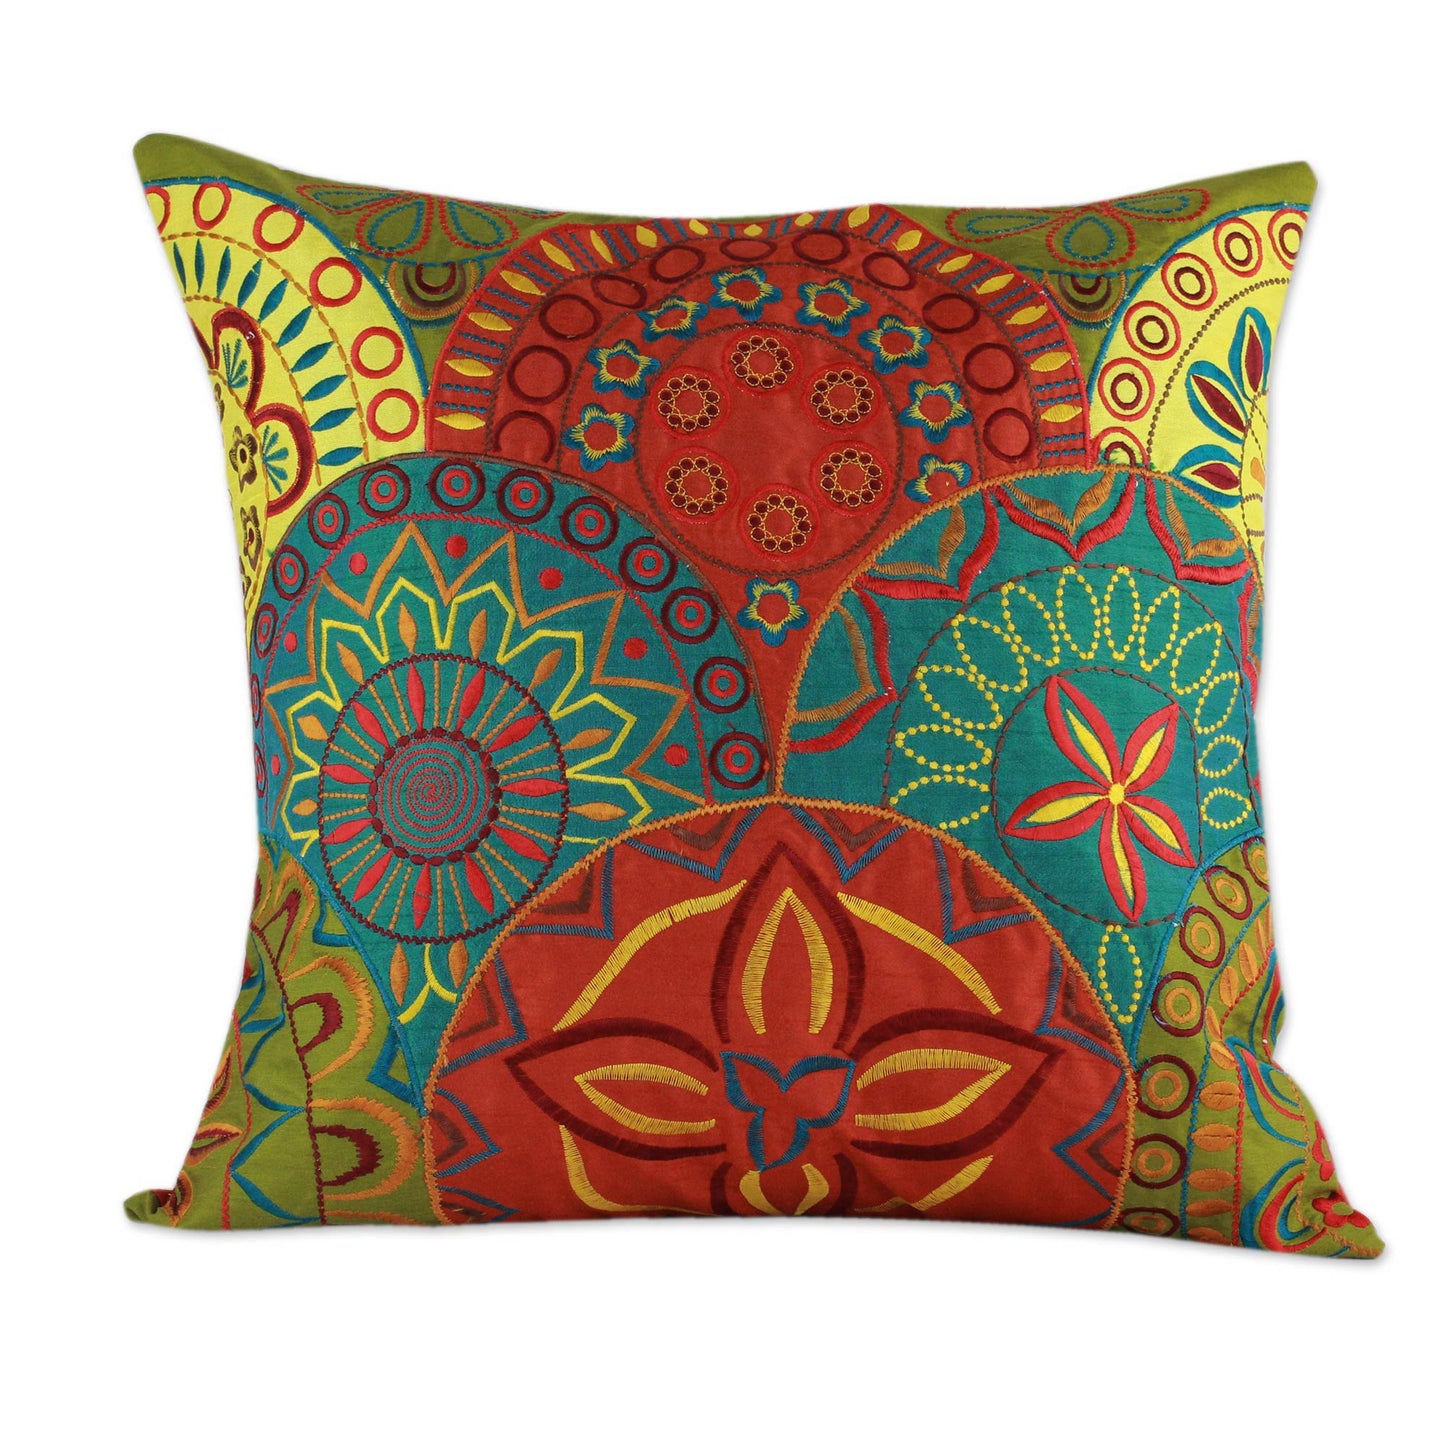 Glorious 2 Orange and Teal Embroidered Applique Cushion Covers